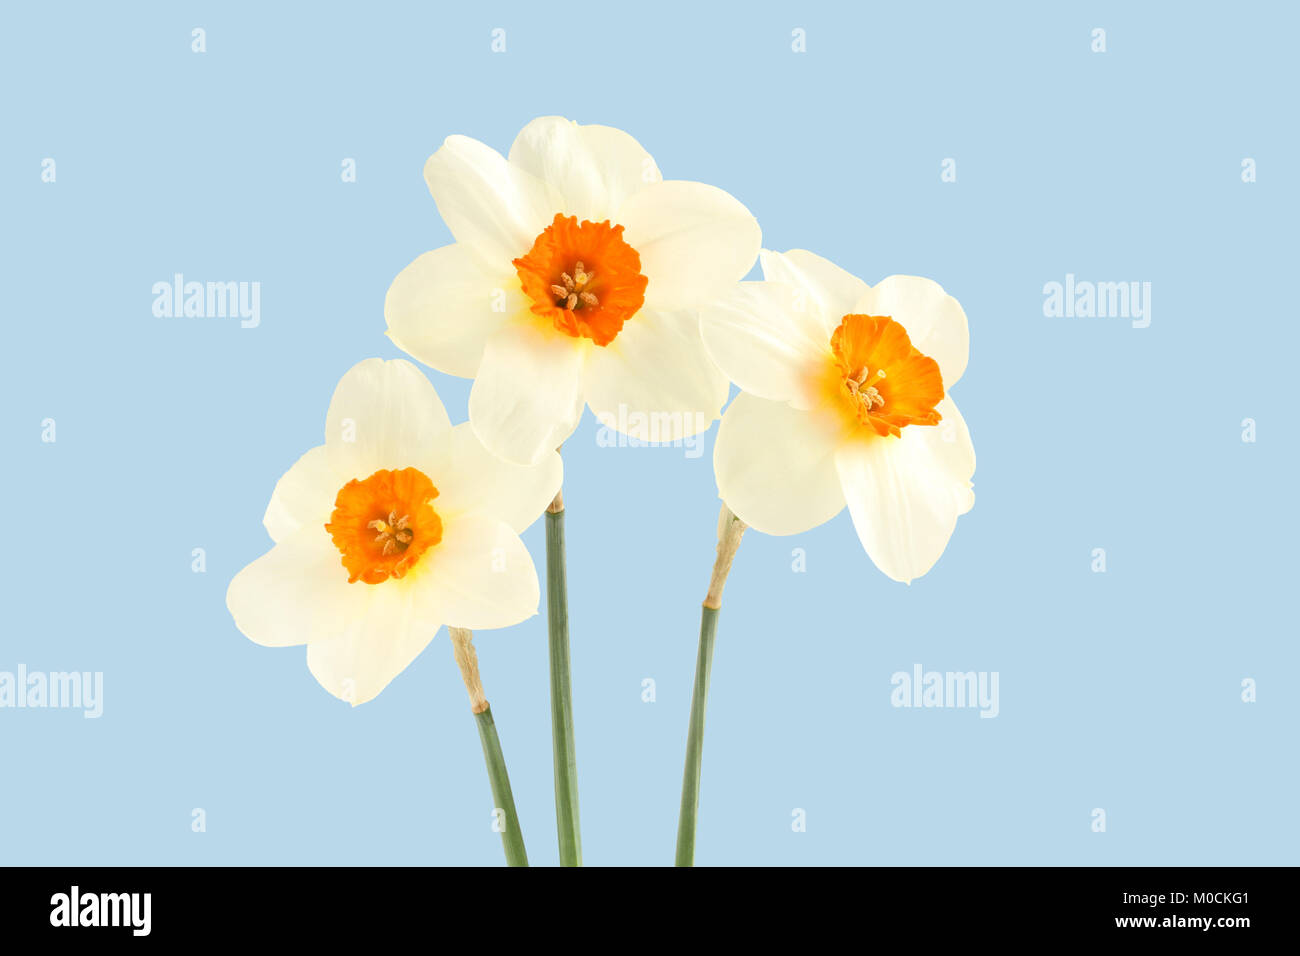 Bouquet of three daffodils isolated on light blue background Stock Photo